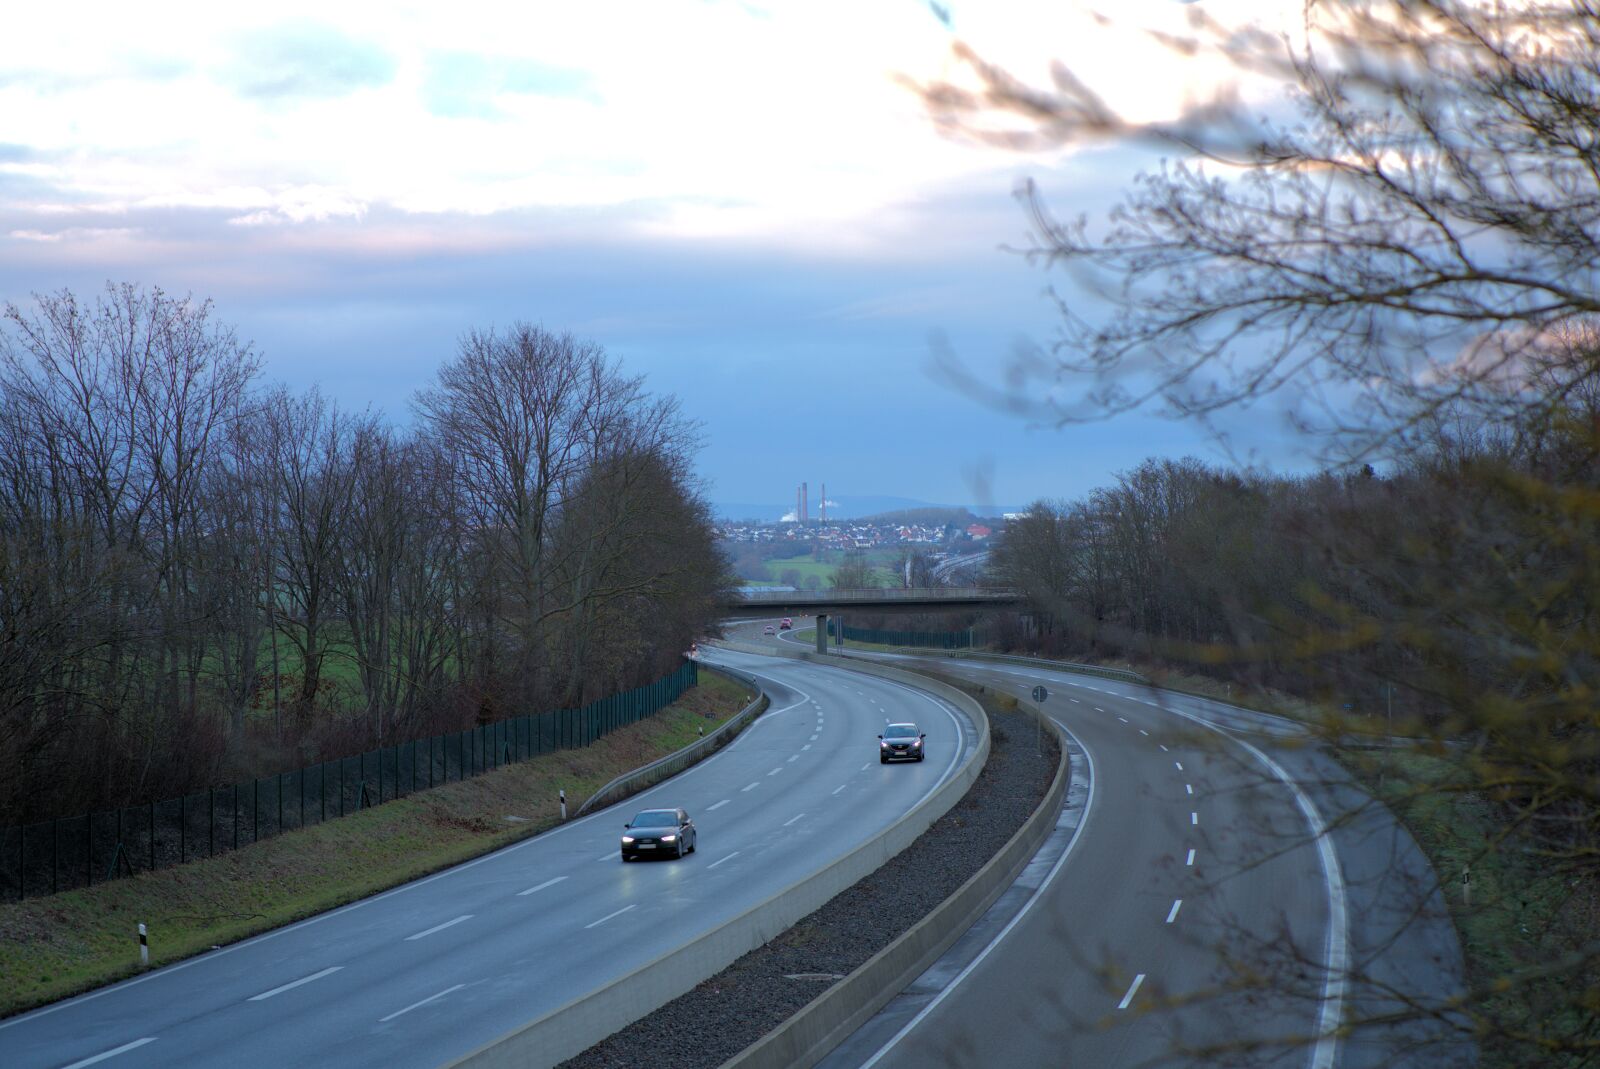 ZEISS Batis 85mm F1.8 sample photo. Highway, auto, road photography